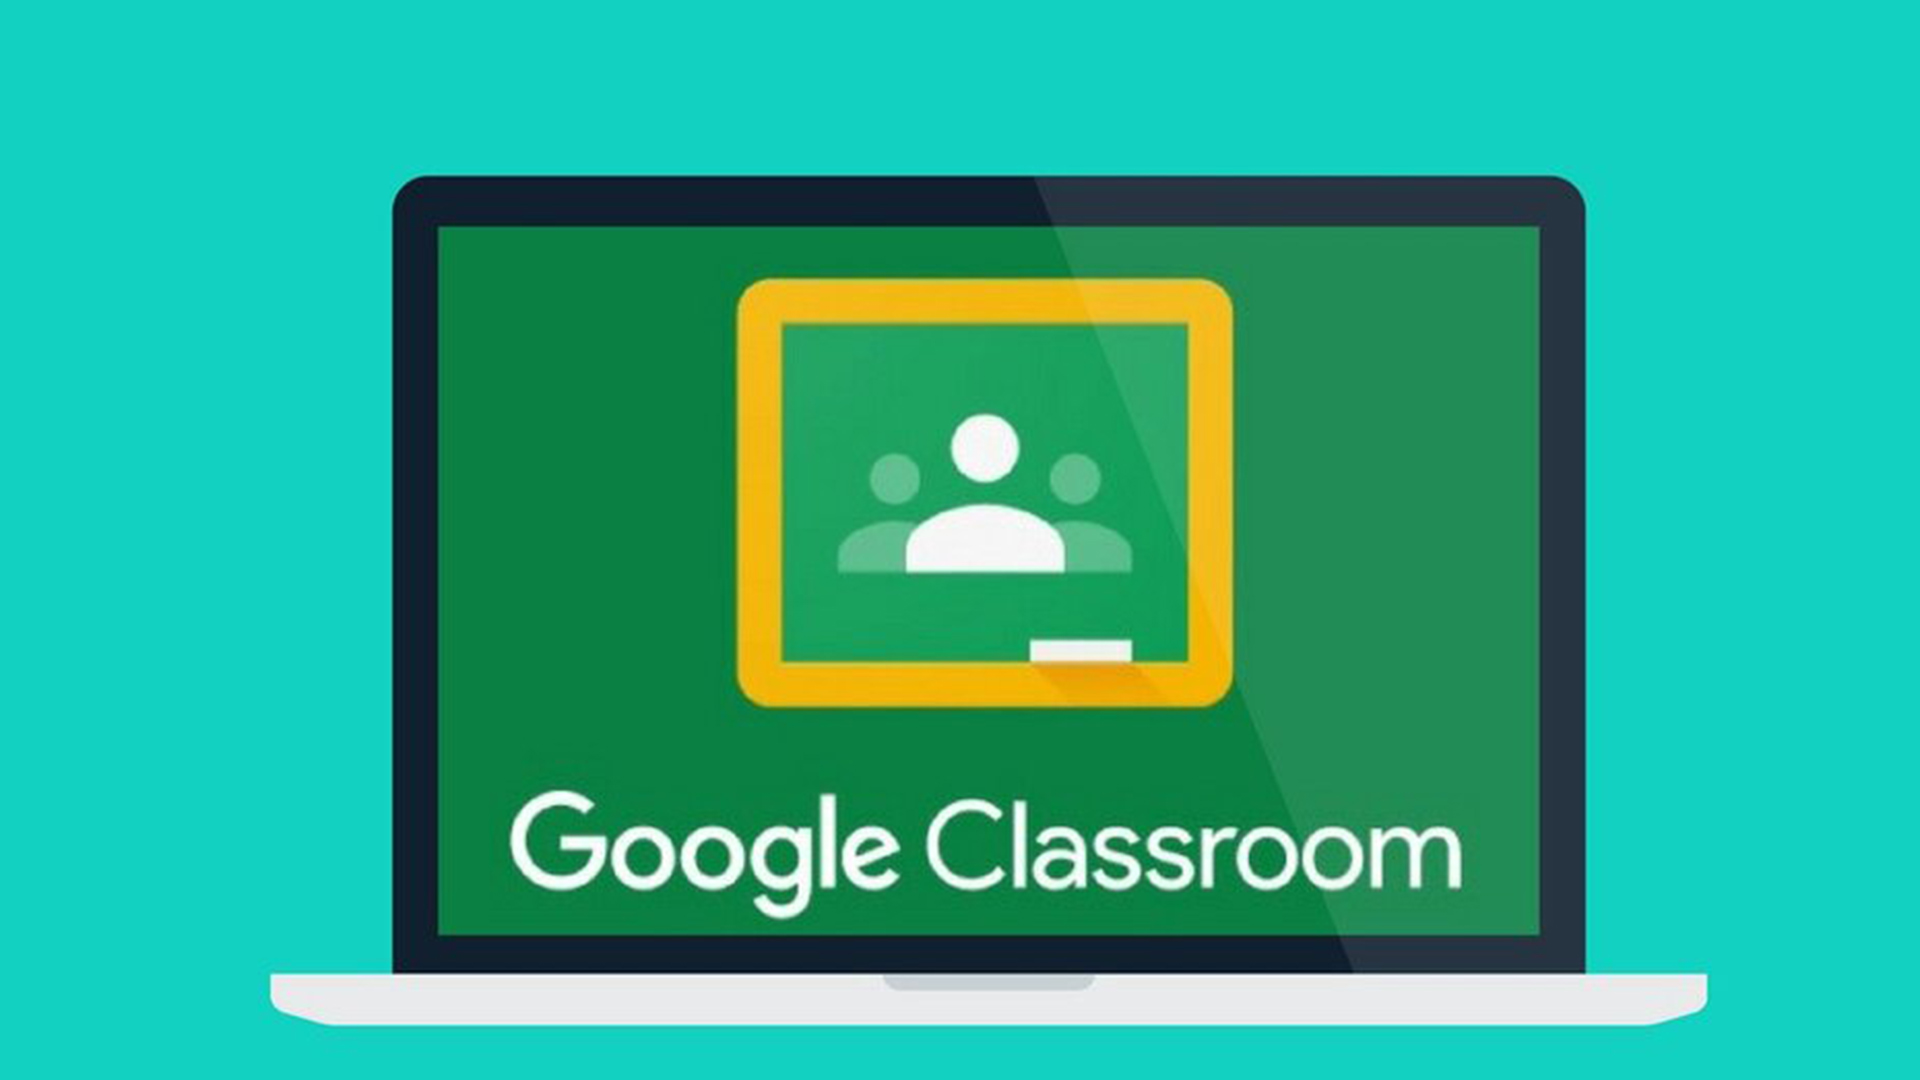 A Quick Guide on Using Google Classroom - Dignited